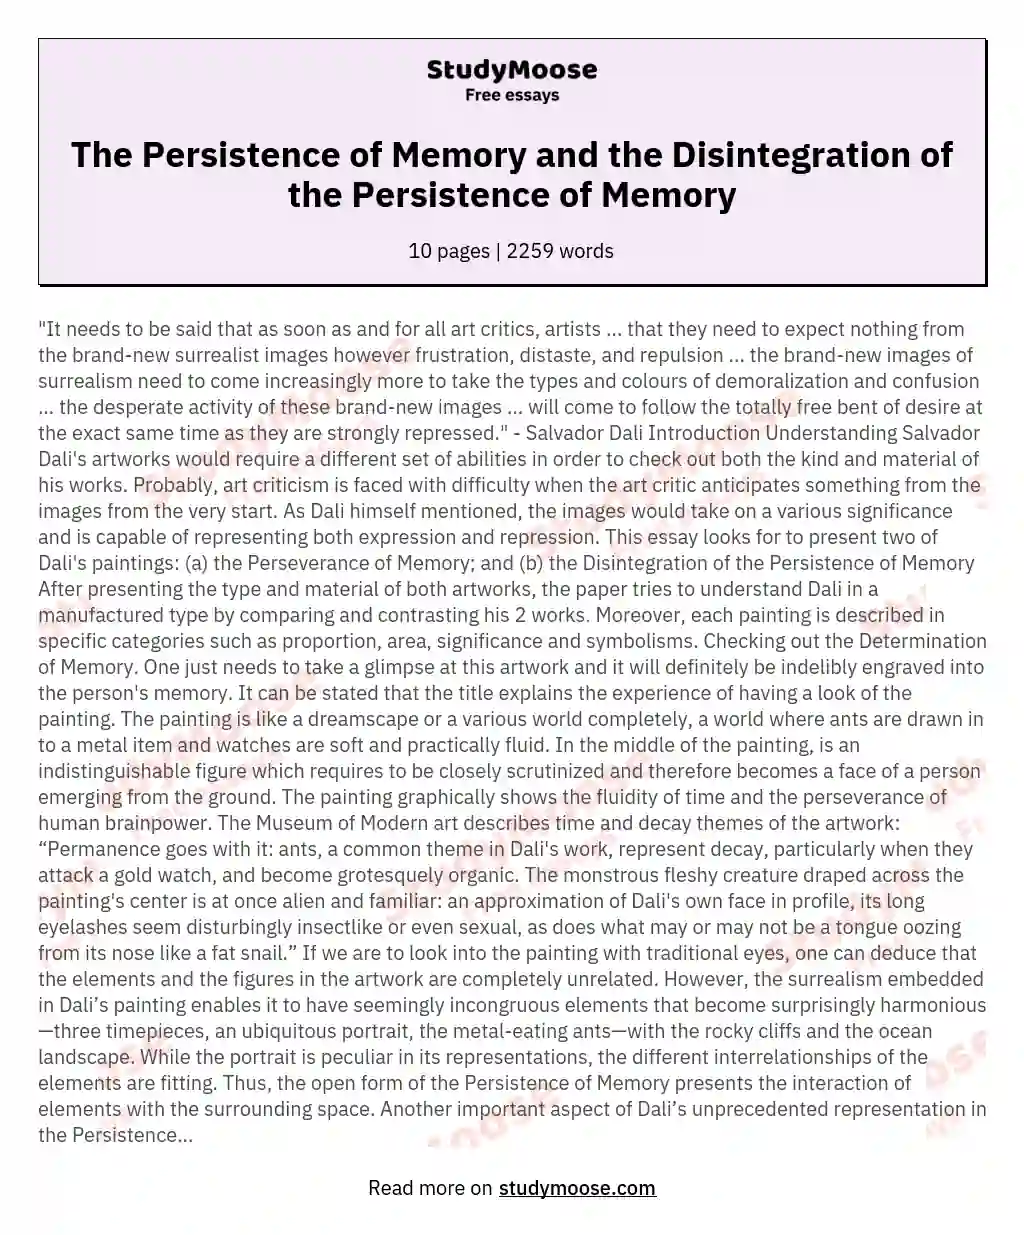 The Persistence of Memory and the Disintegration of the Persistence of Memory essay